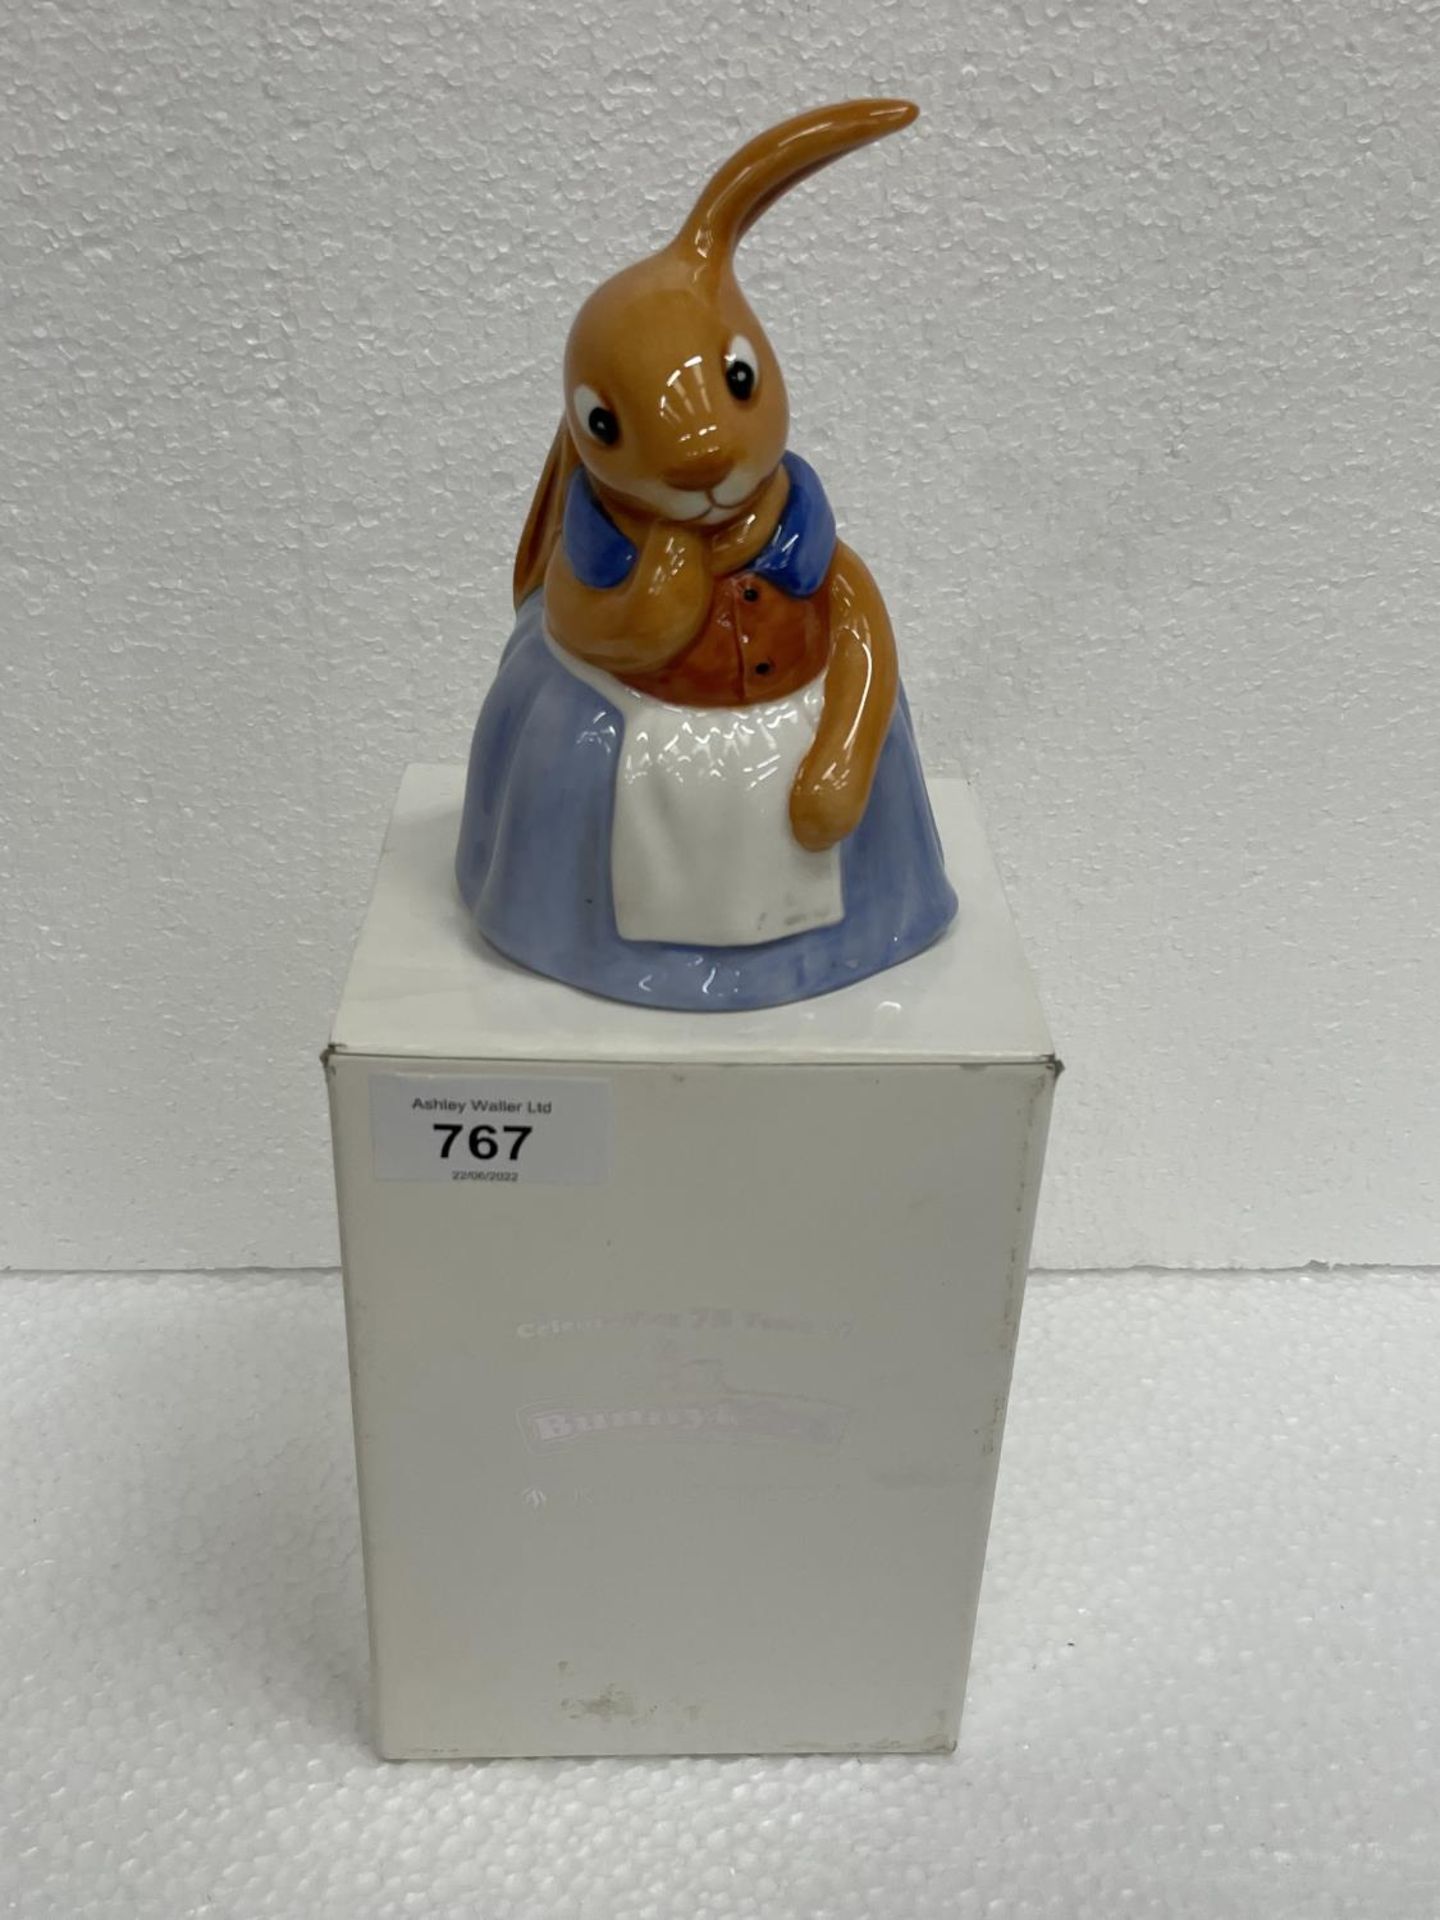 A BOXED LIMITED EDITION 242/500 ROYAL DOULTON BUNNYKINS FIGURE MARY BUNNYKINS - Image 5 of 5